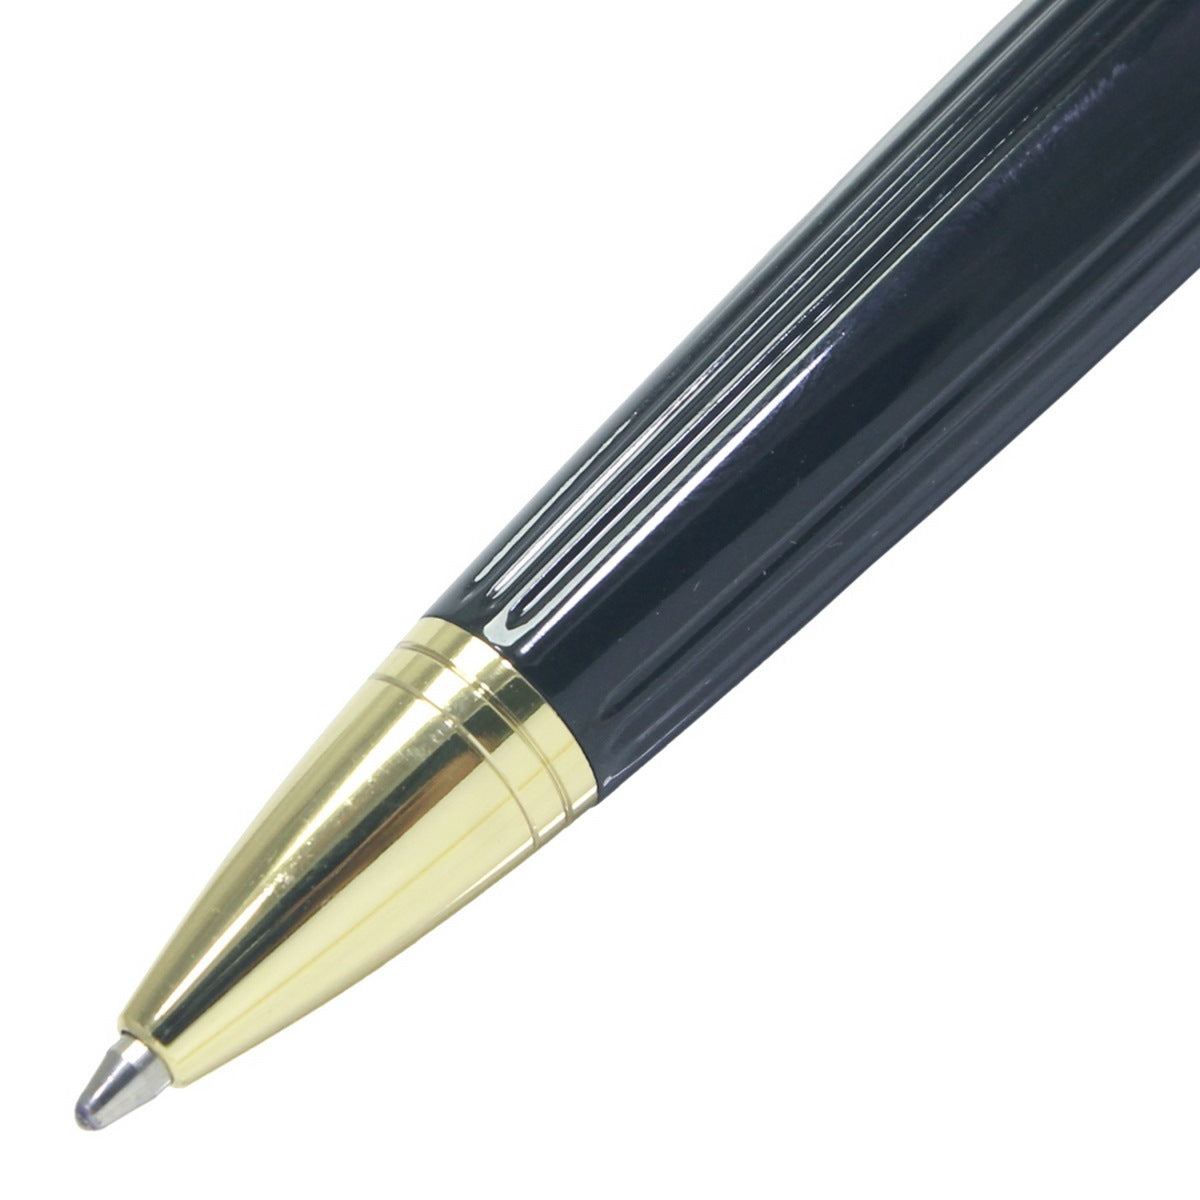 Executive Thick Black Ball Pen with Golden Clip - For Office, College, Personal Use - Baroda